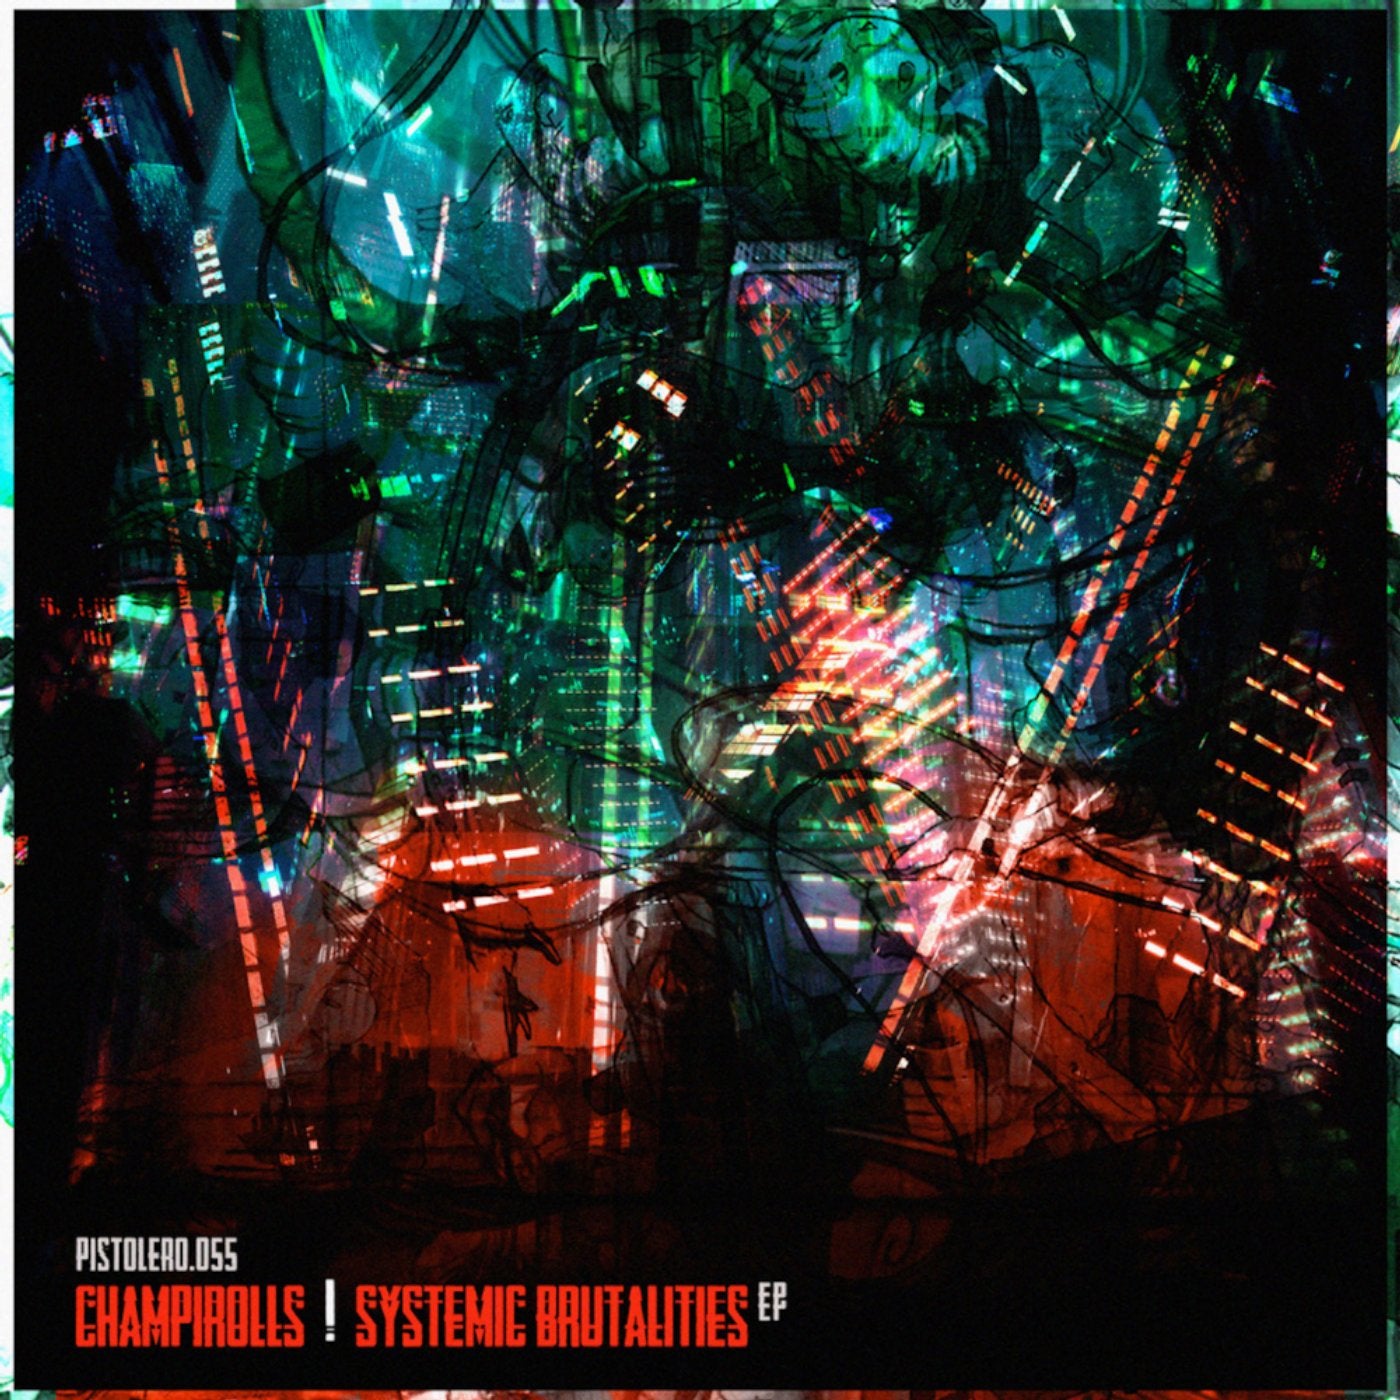 Systemic Brutalities EP